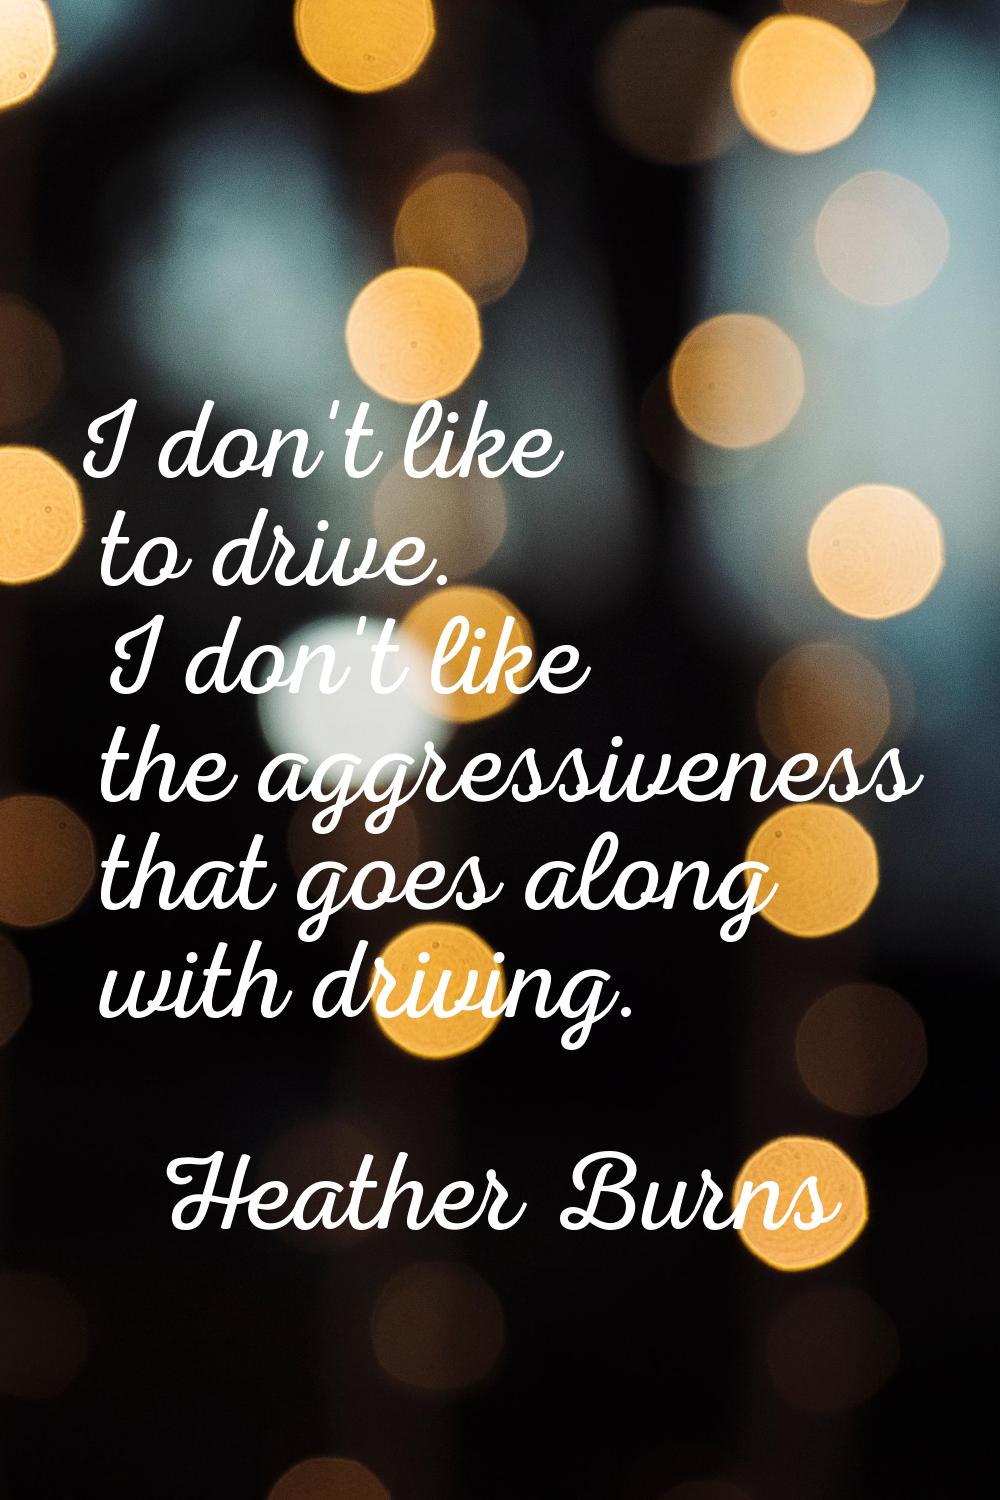 I don't like to drive. I don't like the aggressiveness that goes along with driving.